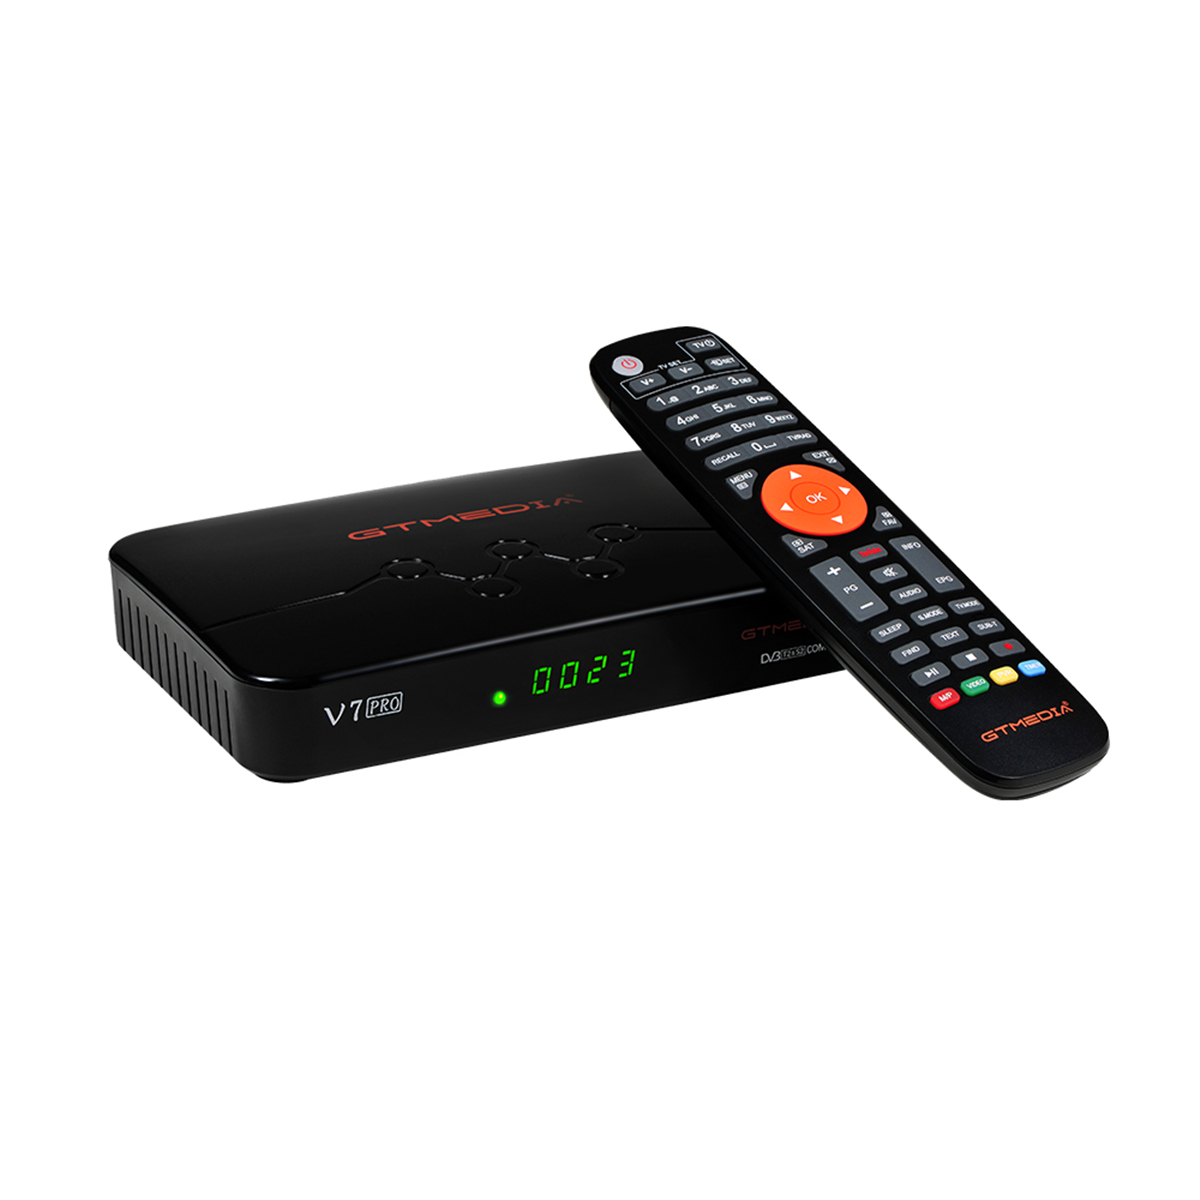 Find GT MEDIA V7 Pro DVB S2 S2X T2 Set Top Box Satellite TV Receiver Upgrade CA Card Slot USB WiFi Support Network Cam TV BOX for Sale on Gipsybee.com with cryptocurrencies